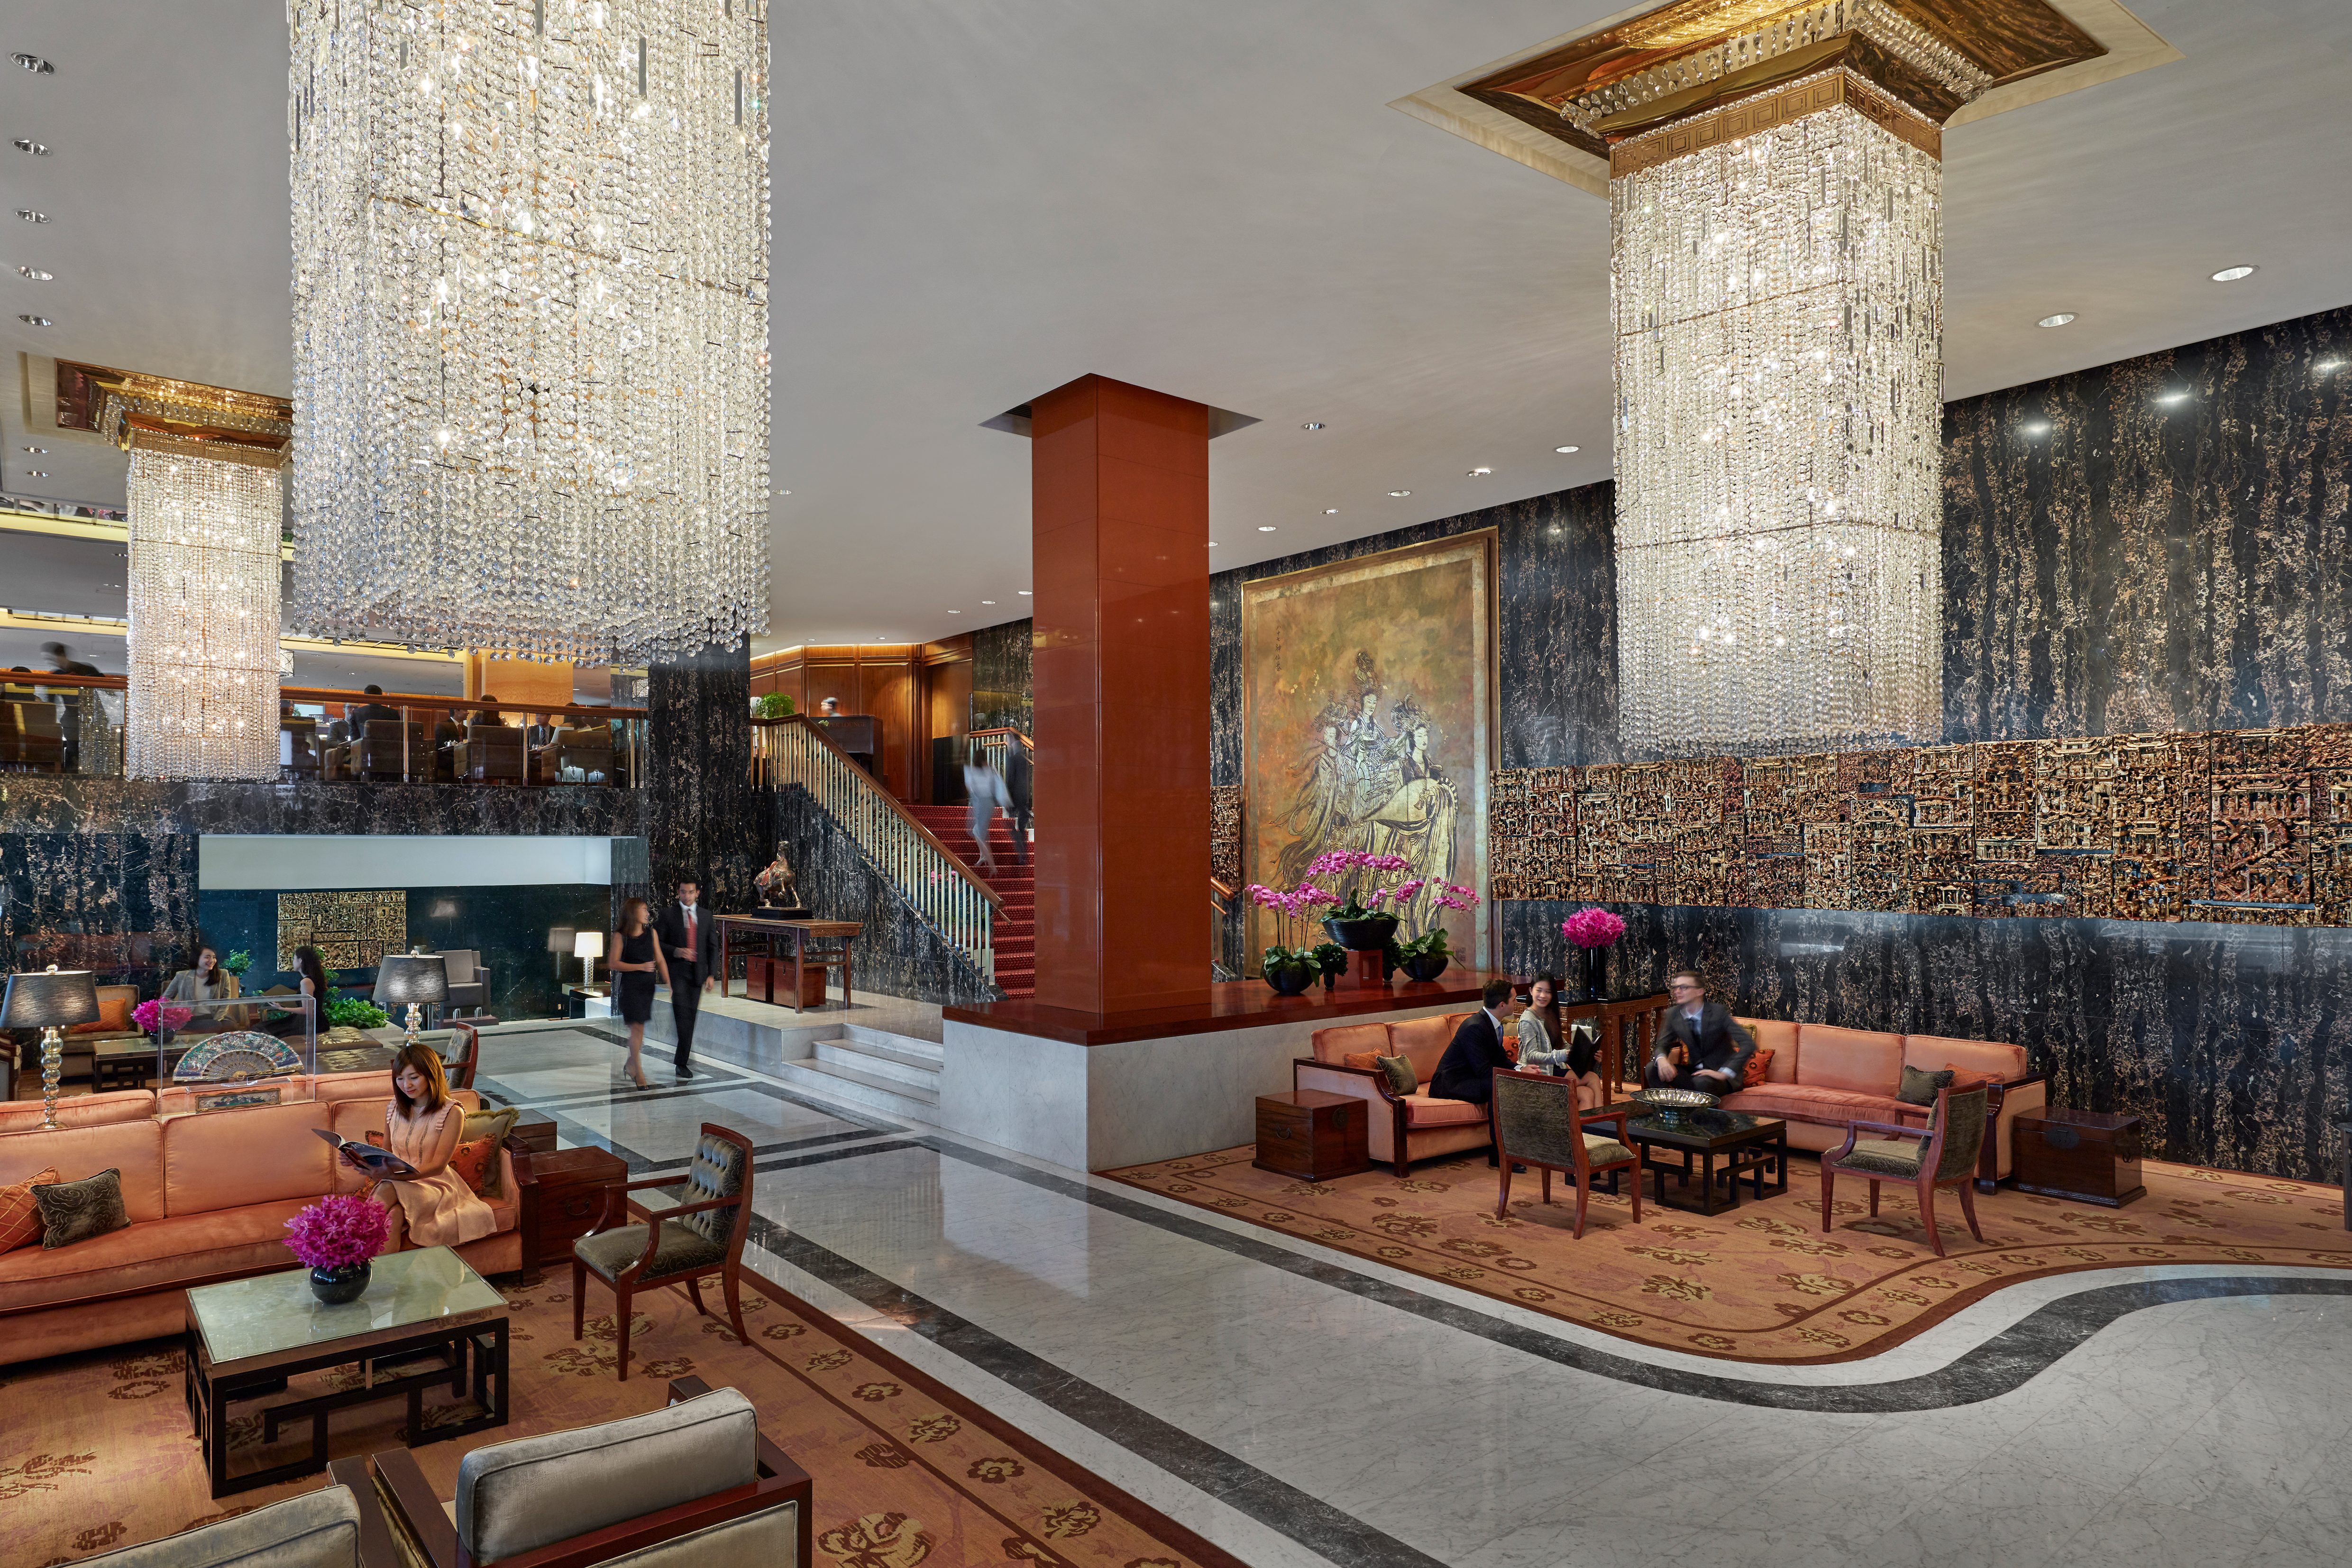 Elaborate crystal lighting fixtures hang above plush sofas where guests are seated inside Mandarin Oriental, Hong Kong